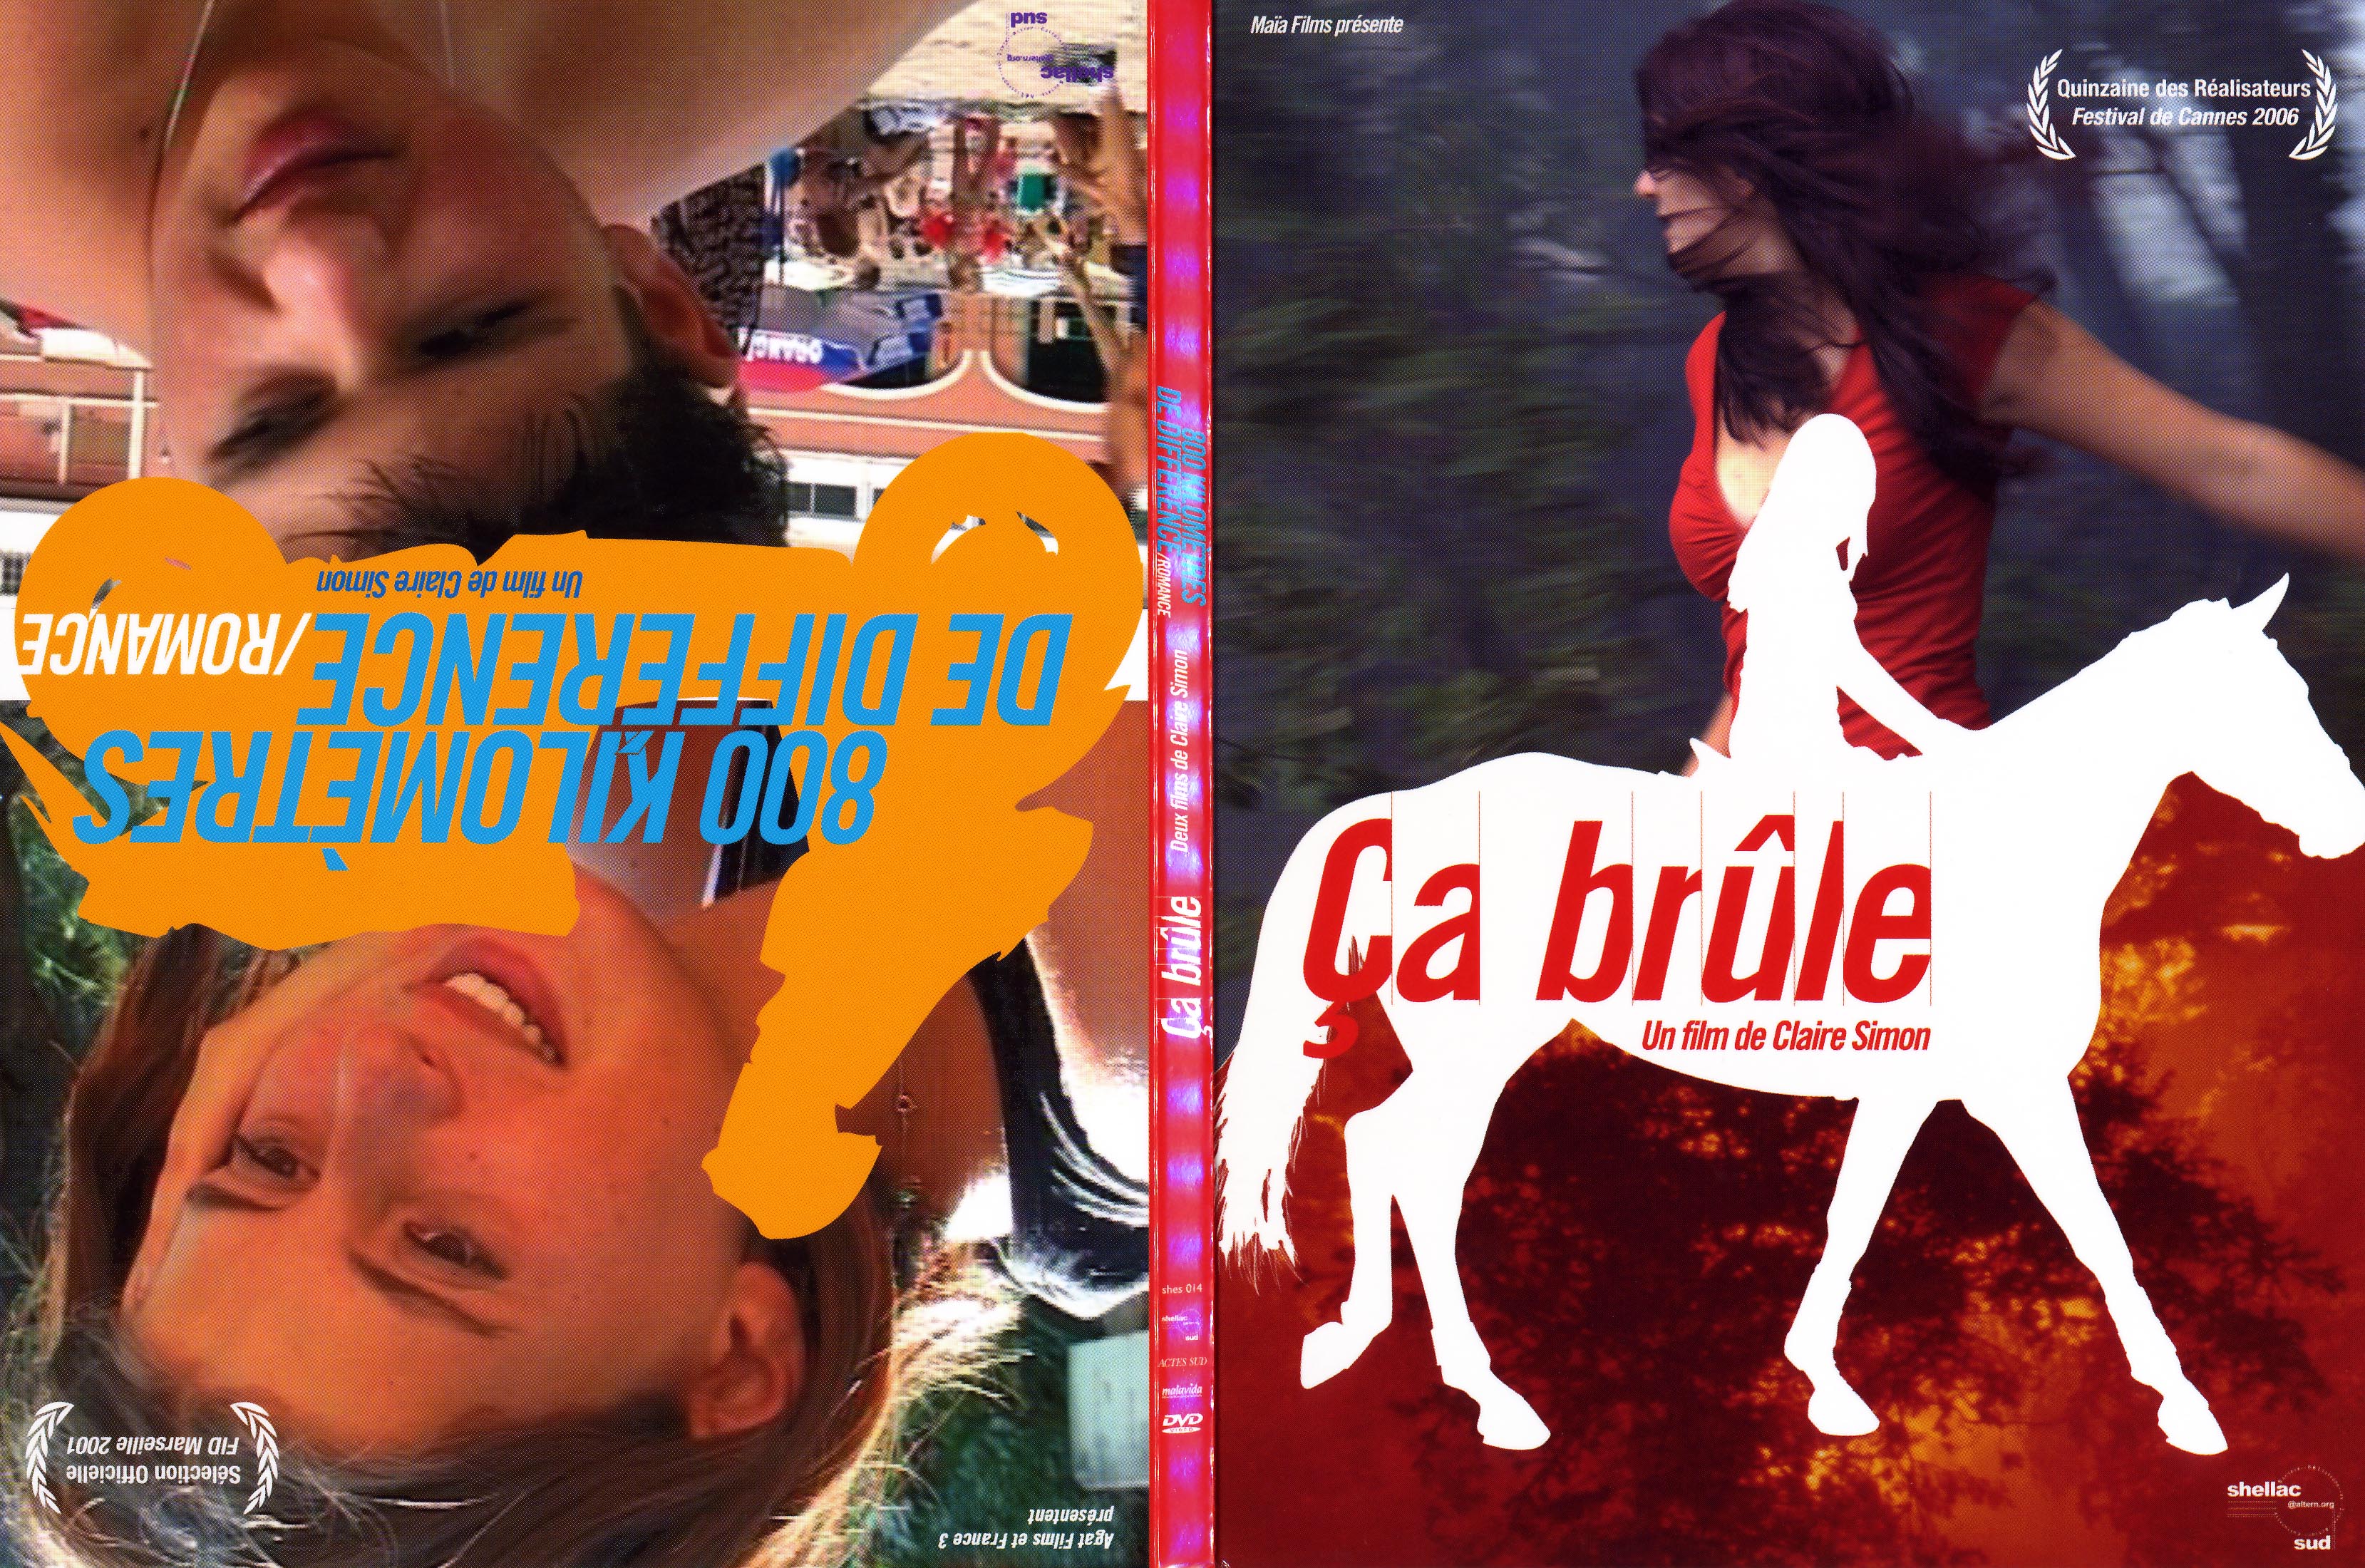 Jaquette DVD Ca brule ET 800 km difference